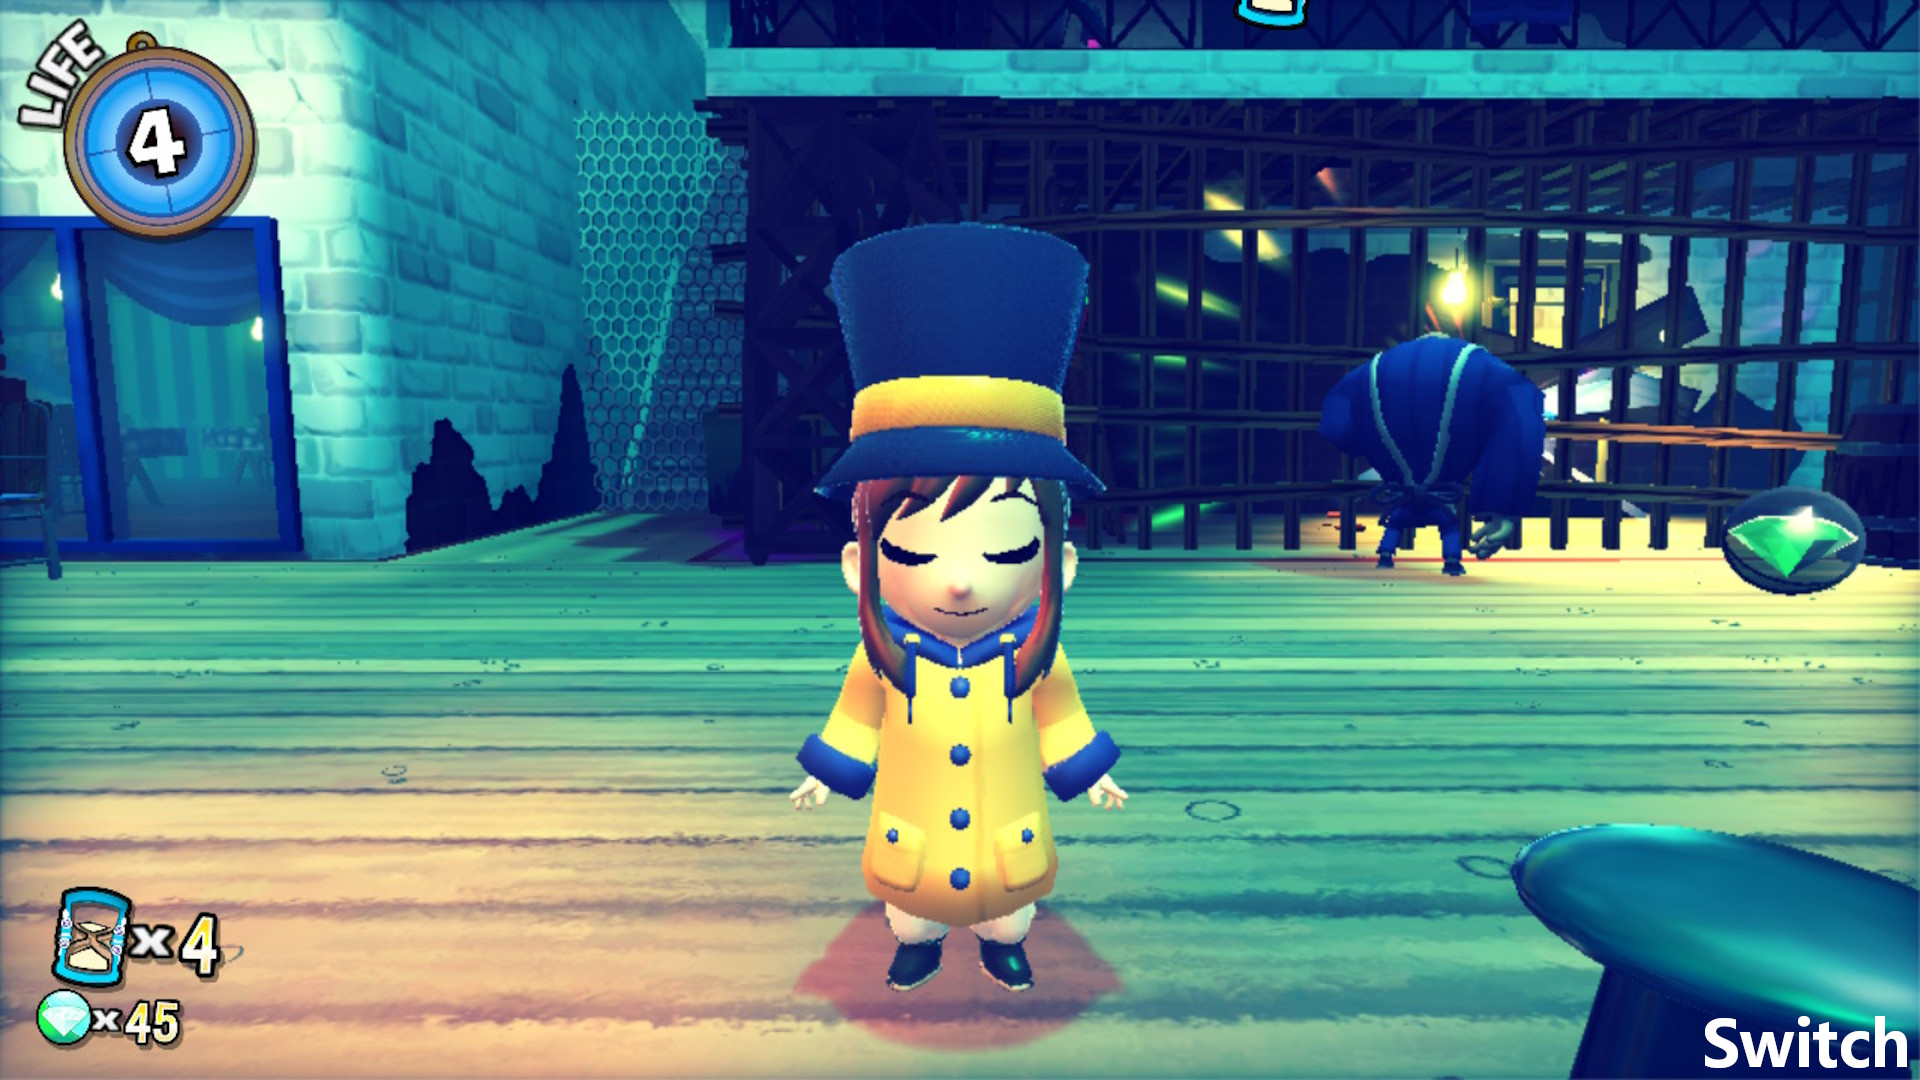 A Hat in Time Review (Nintendo Switch) - Official GBAtemp Review |  GBAtemp.net - The Independent Video Game Community